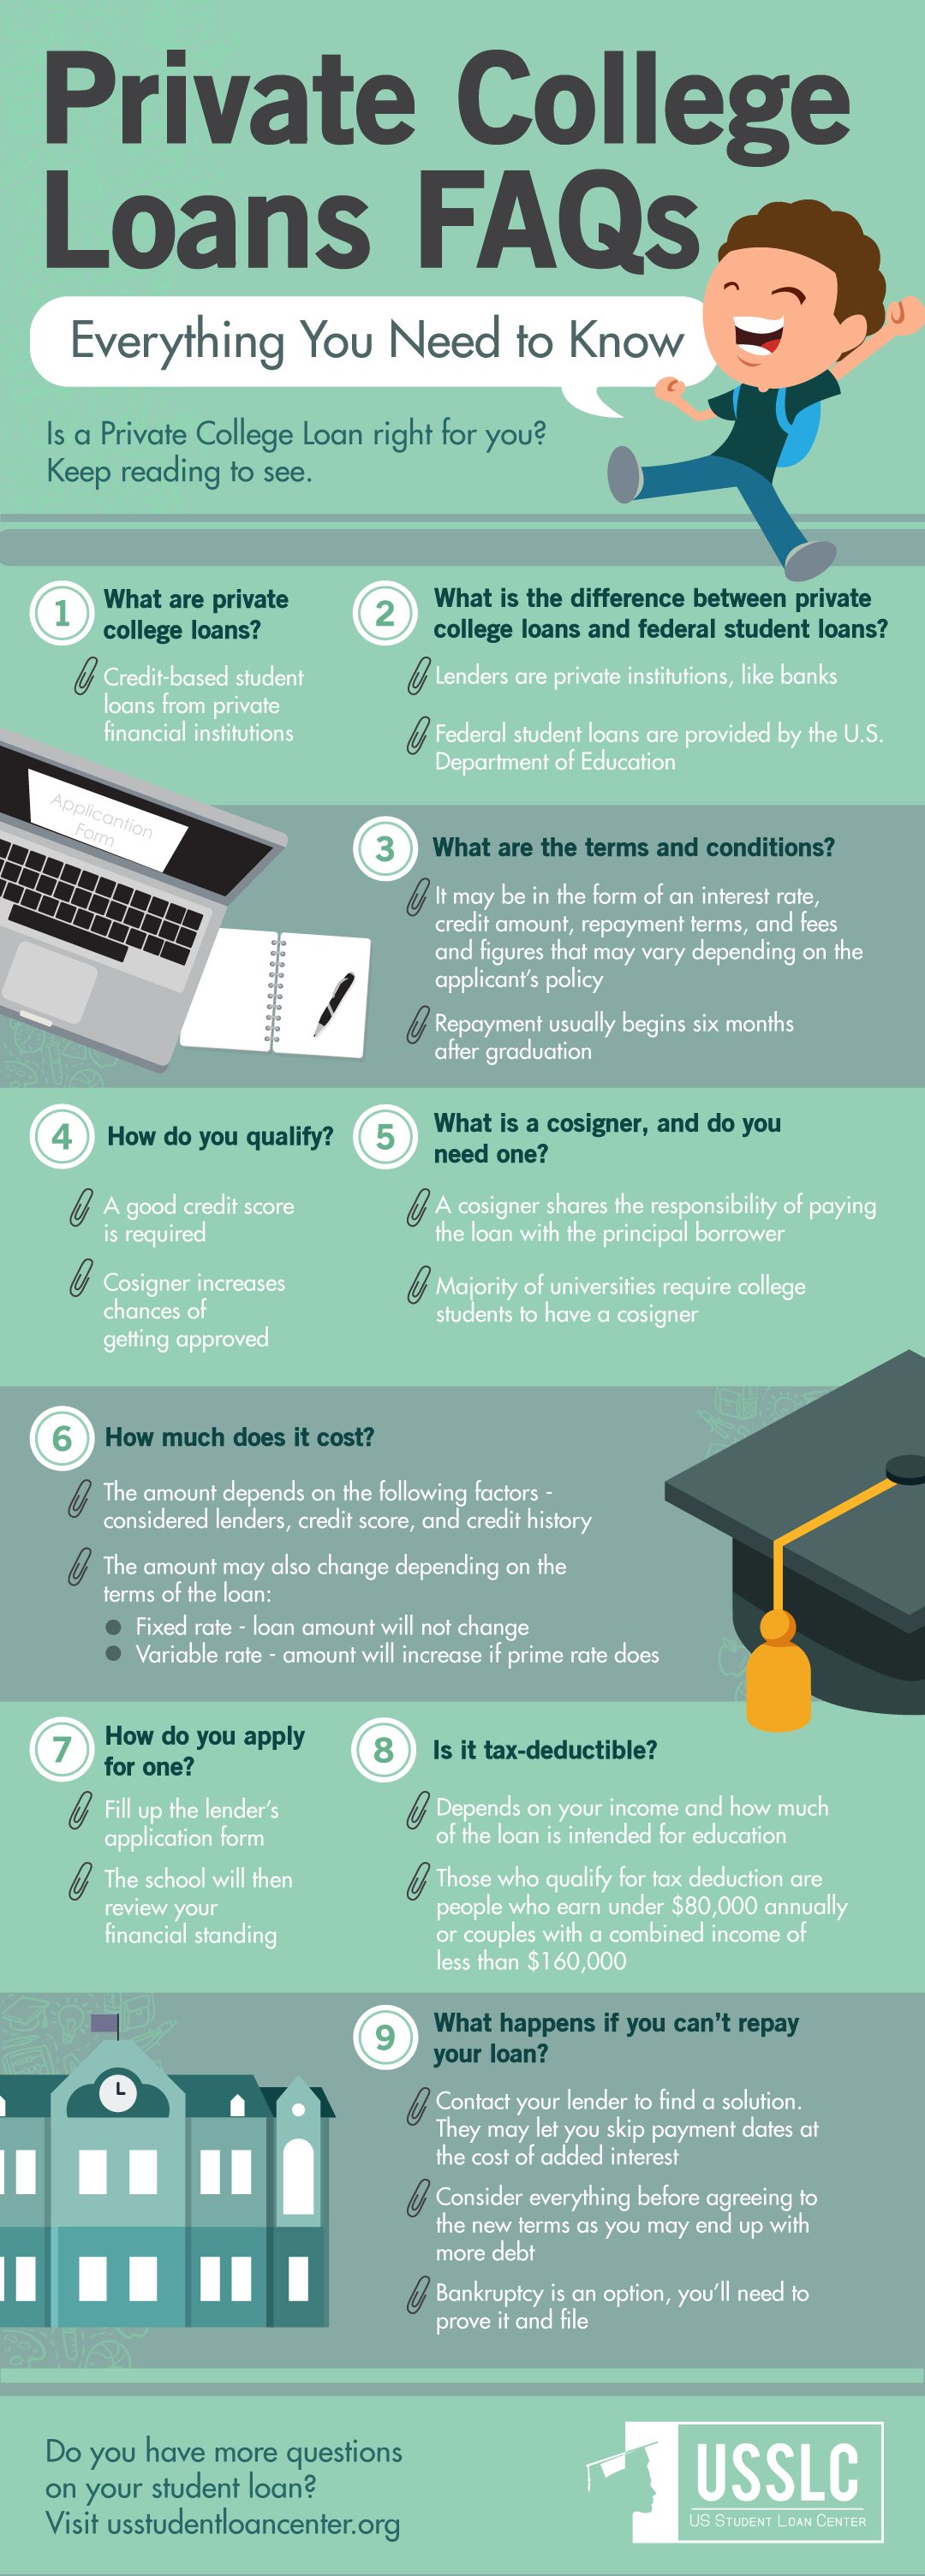 Private College Loans FAQs: Everything You Need to Know